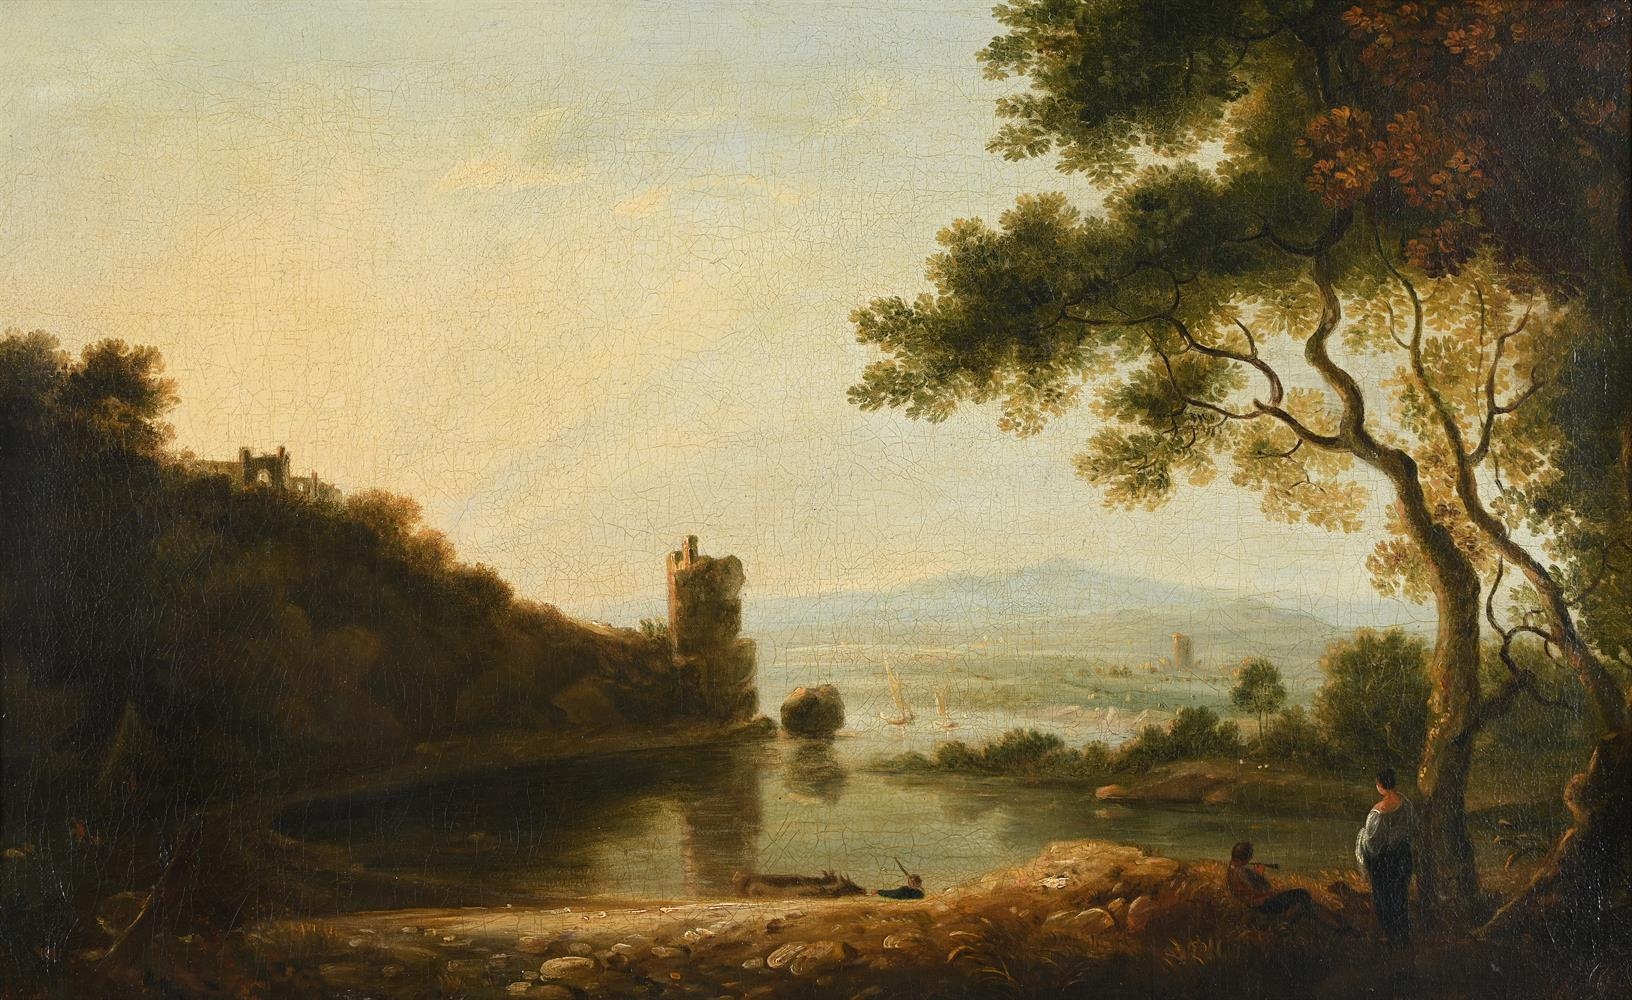 A RIVER LANDSCAPE AT SUNSET by William Hodges